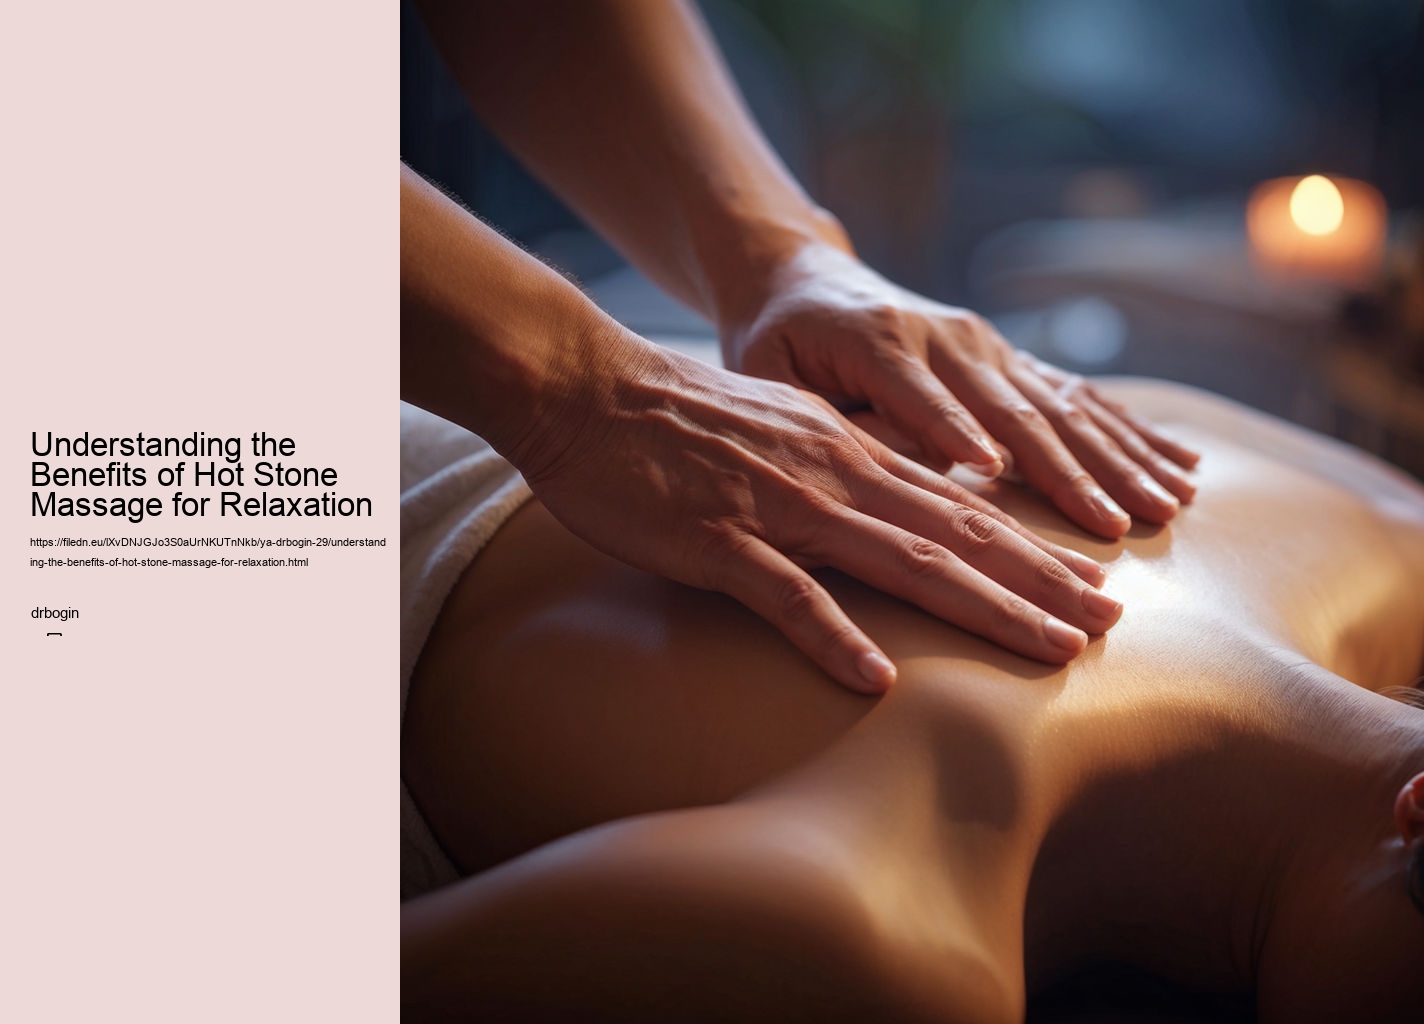 Understanding the Benefits of Hot Stone Massage for Relaxation